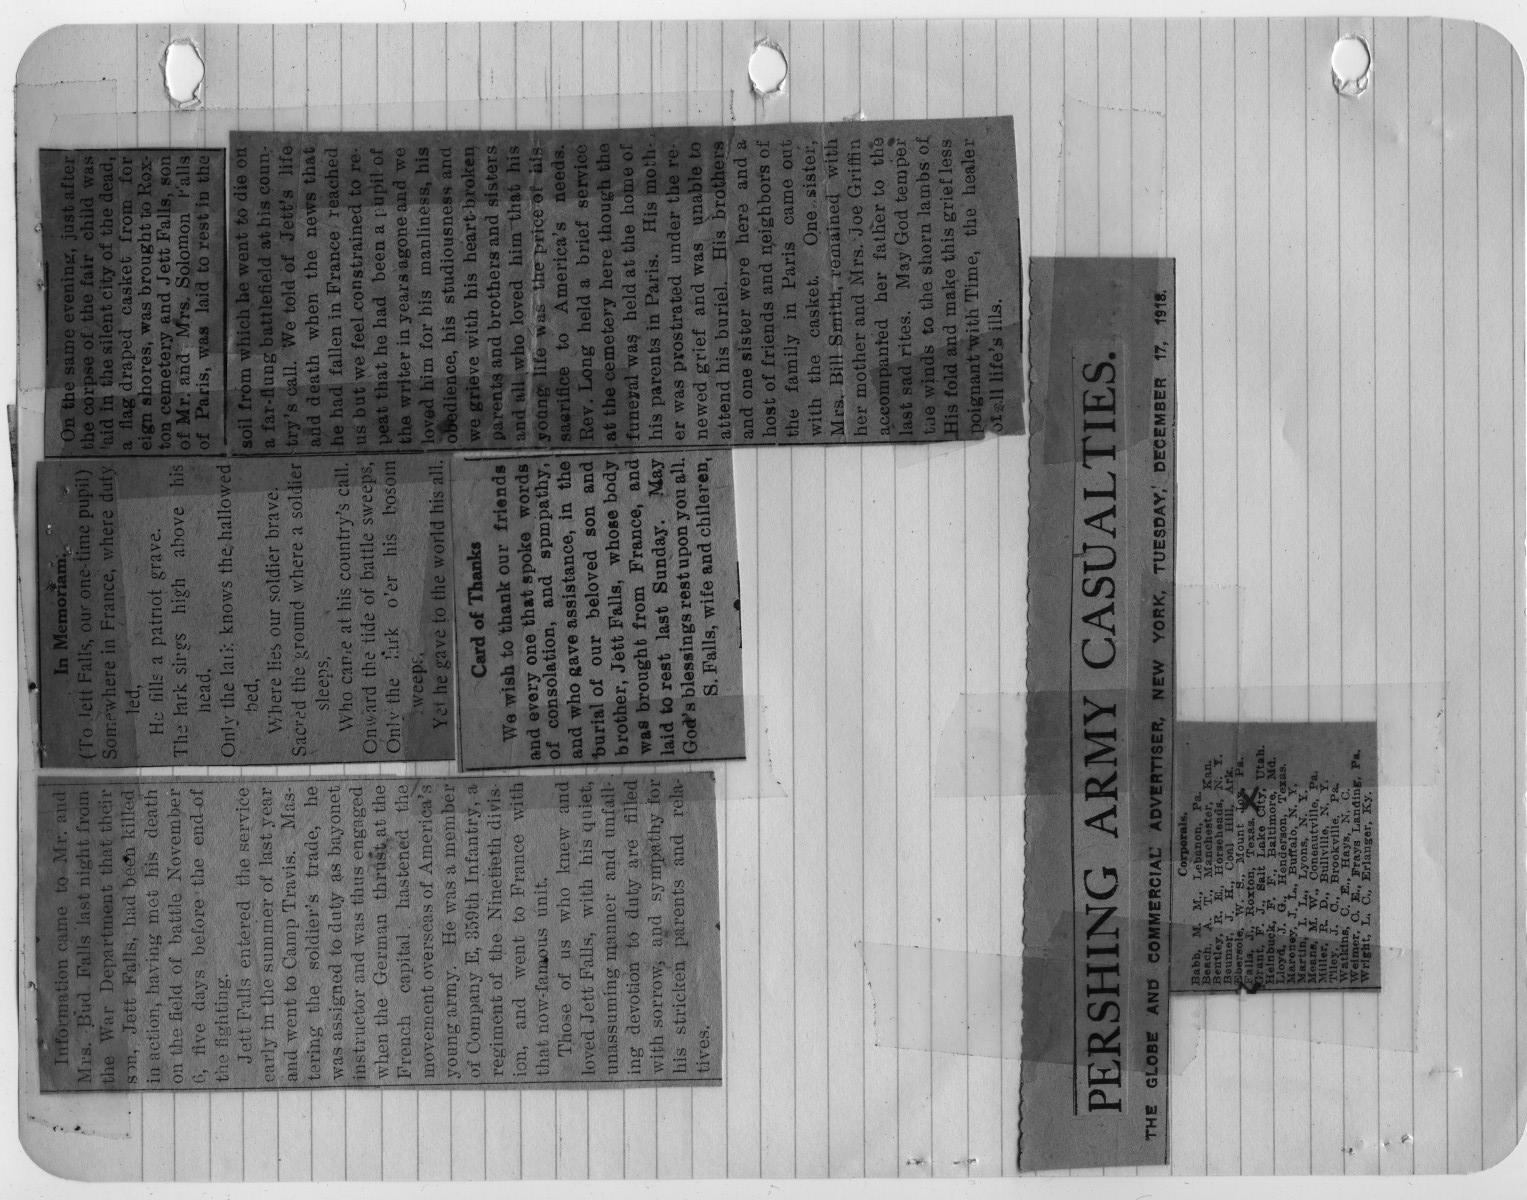 [Newspaper Clippings Relating to Jett Falls Death]
                                                
                                                    [Sequence #]: 1 of 1
                                                